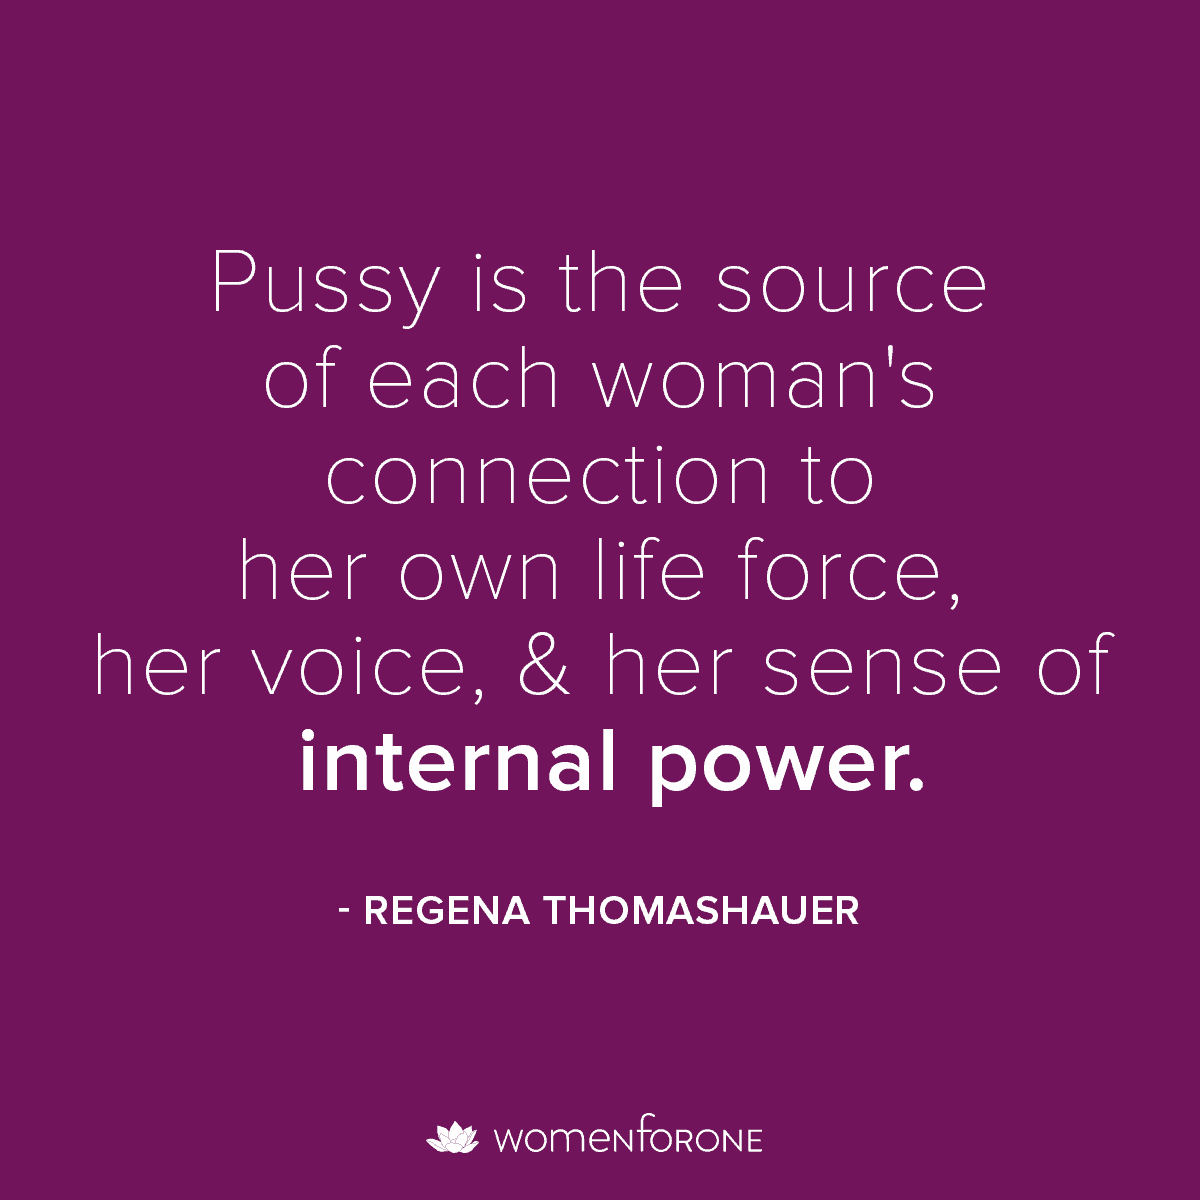 Pussy is the source of each woman's connection to her own life force, her voice, and her sense of internal power. - Regina Thomashauer